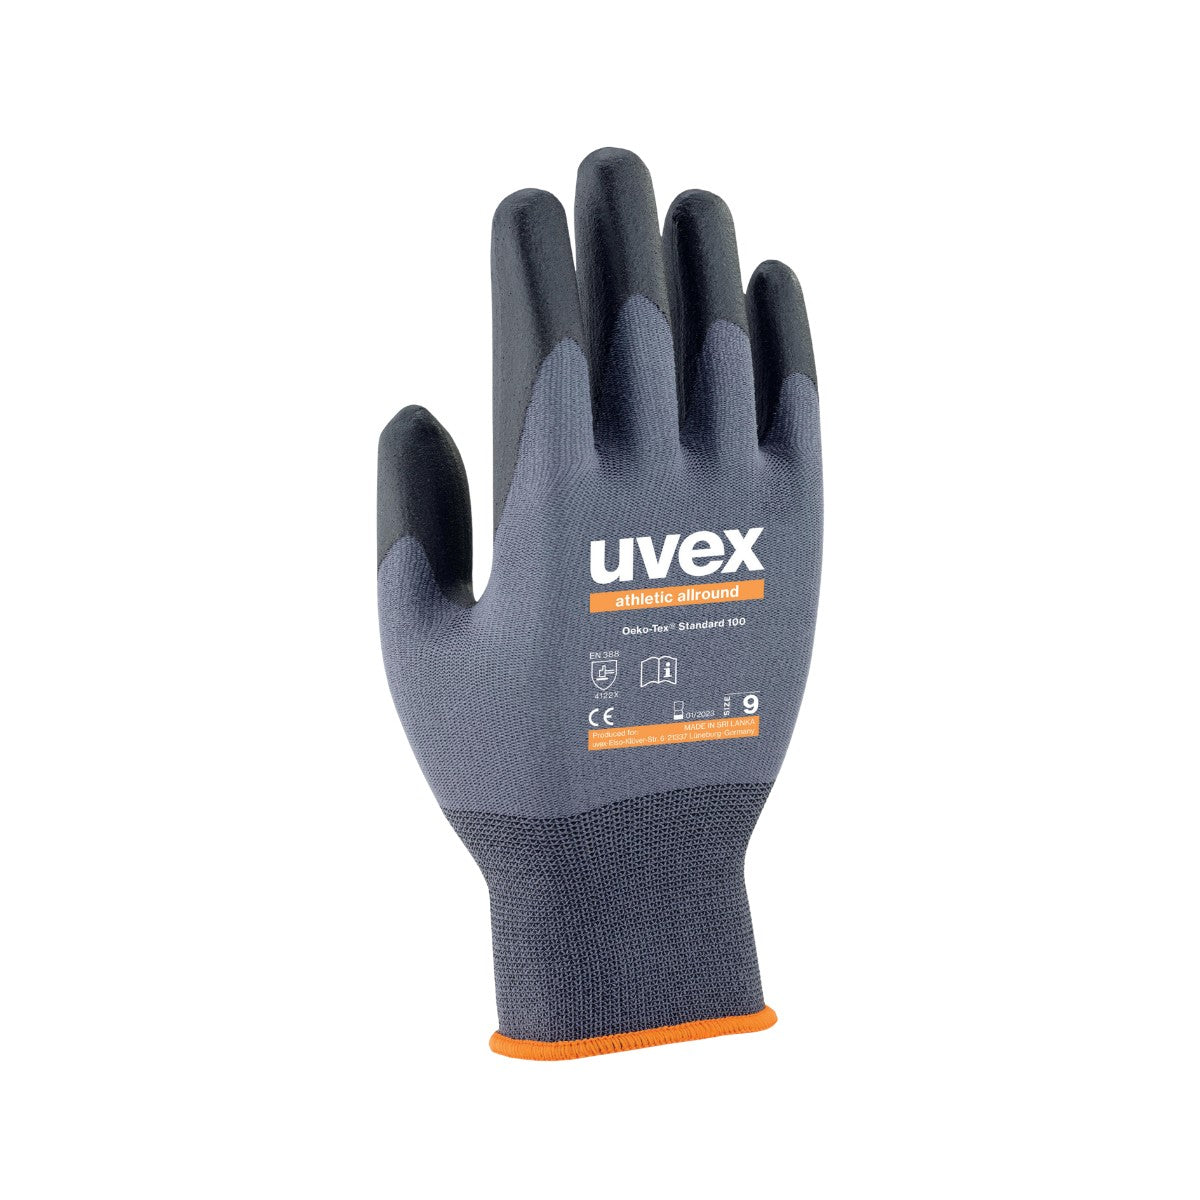 uvex Athletic All-round Assembly Glove 60028 (Box of 10)